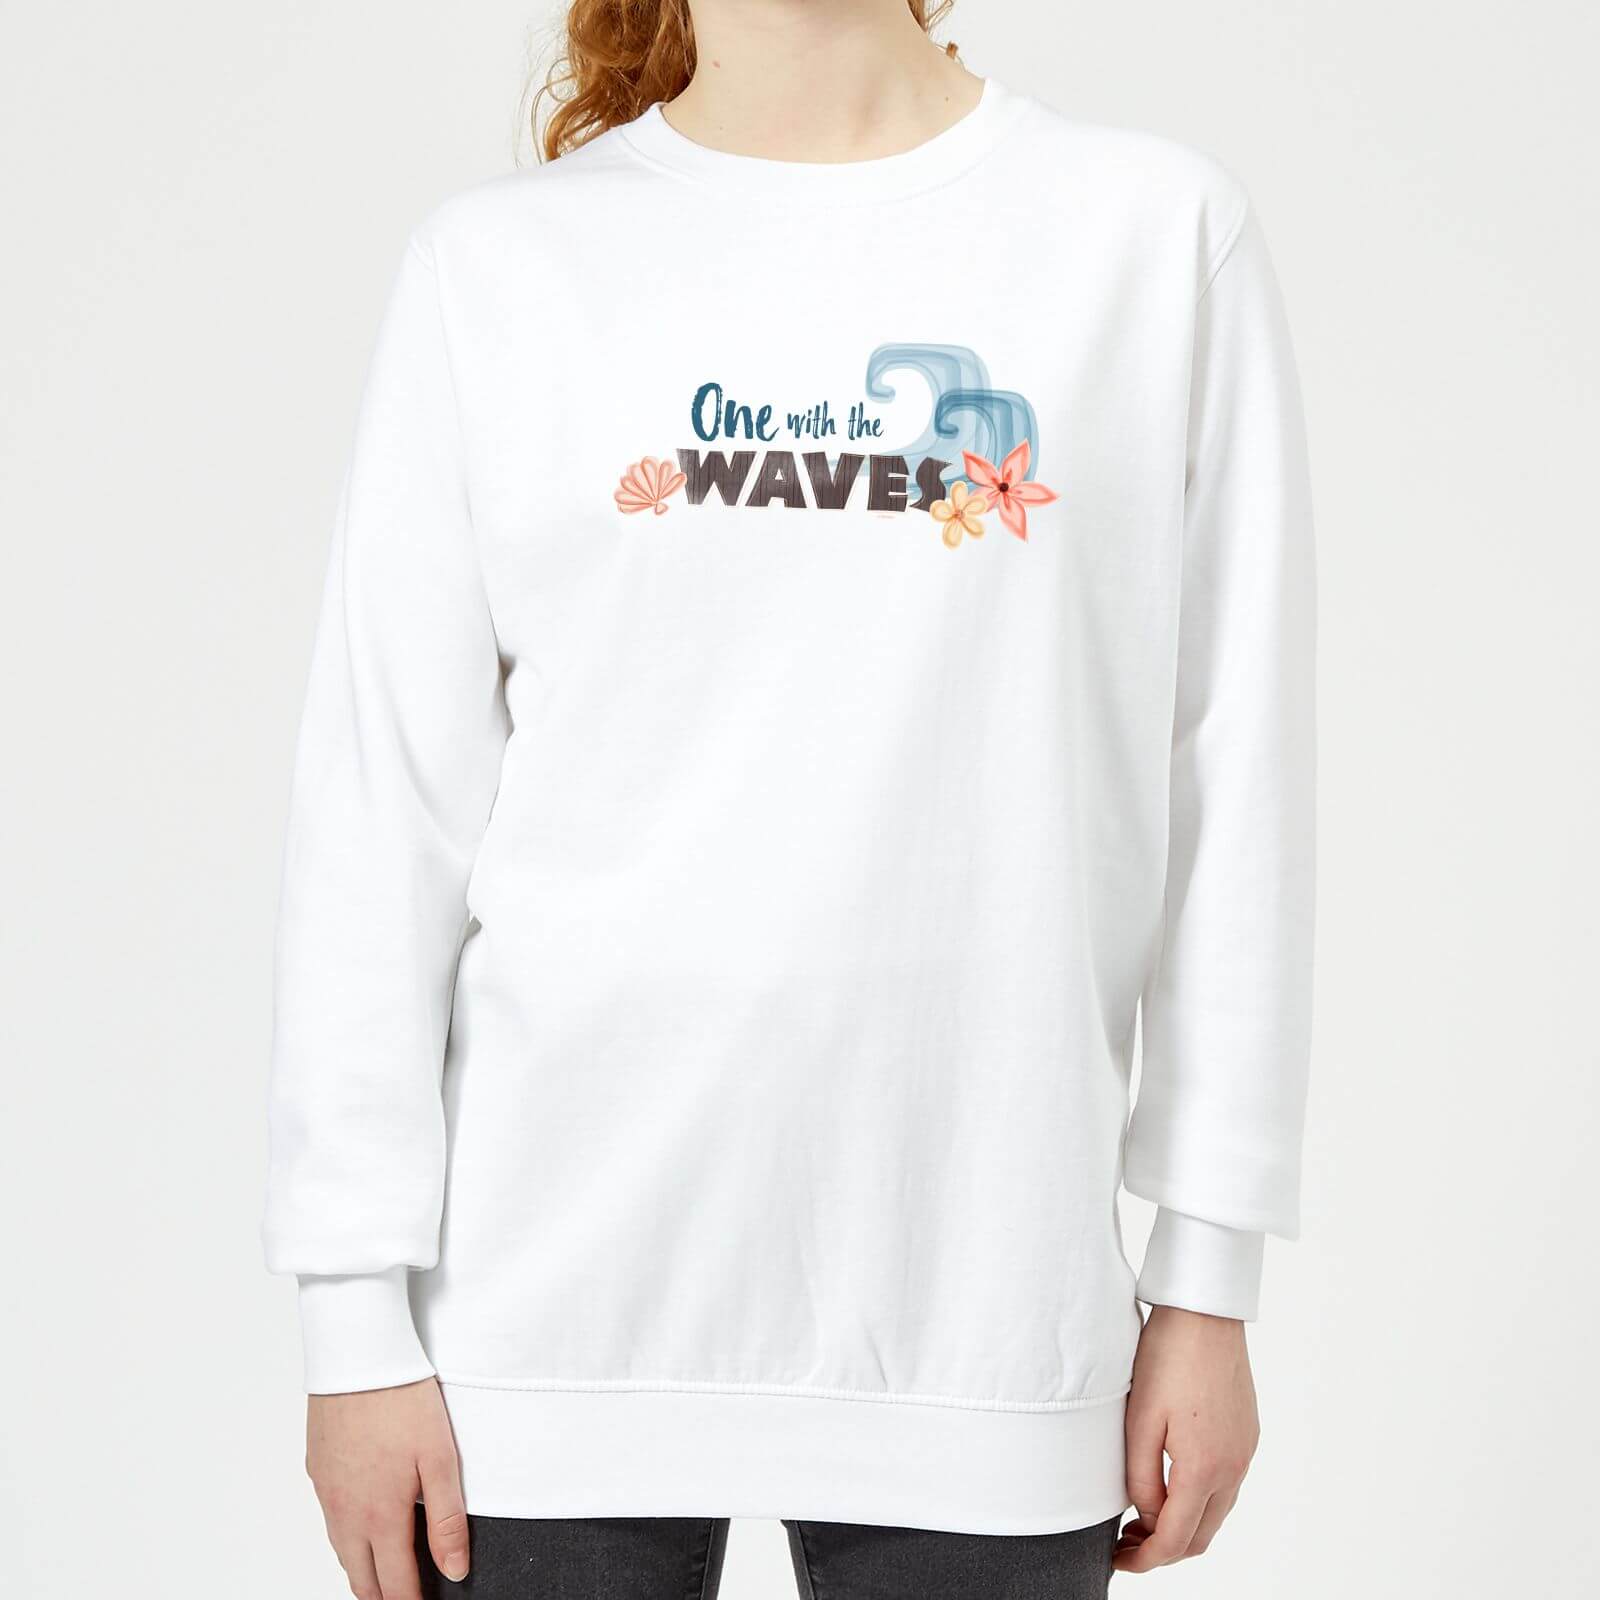 Vaiana (Moana) One With The Waves Damen Pullover - Weiß - S